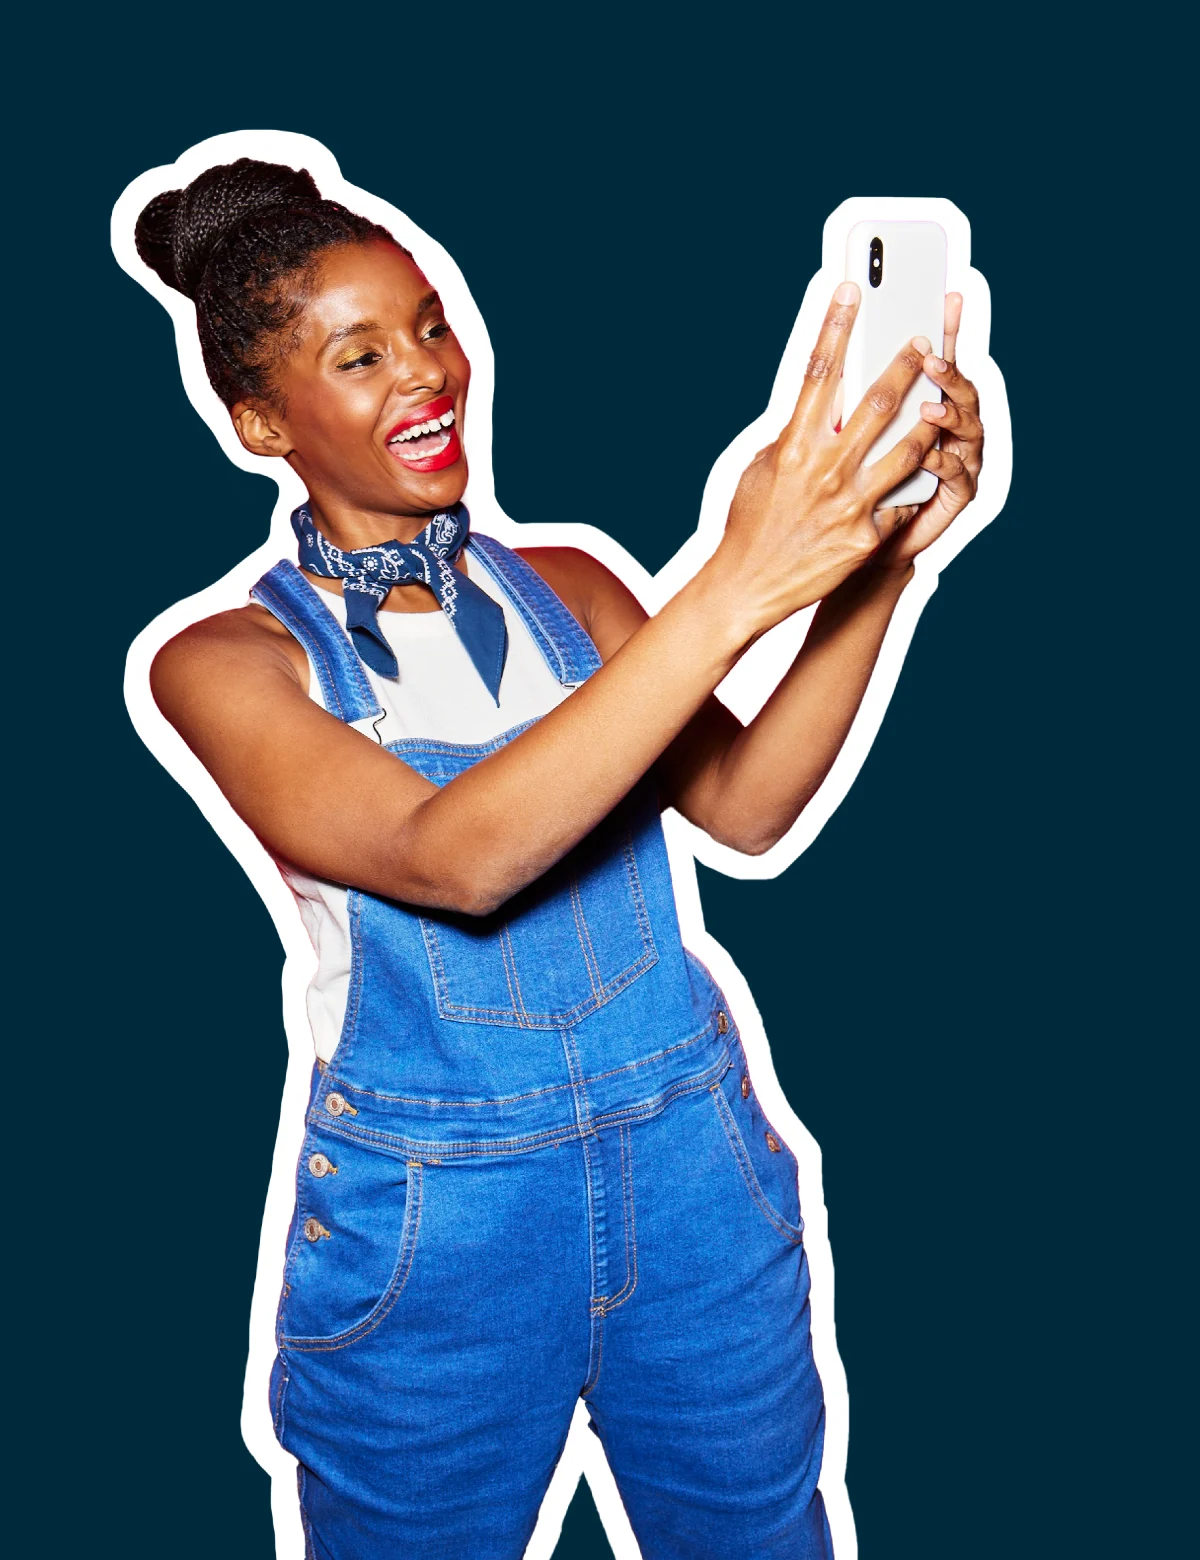 Woman standing and smiling taking a selfie while wearing overalls 